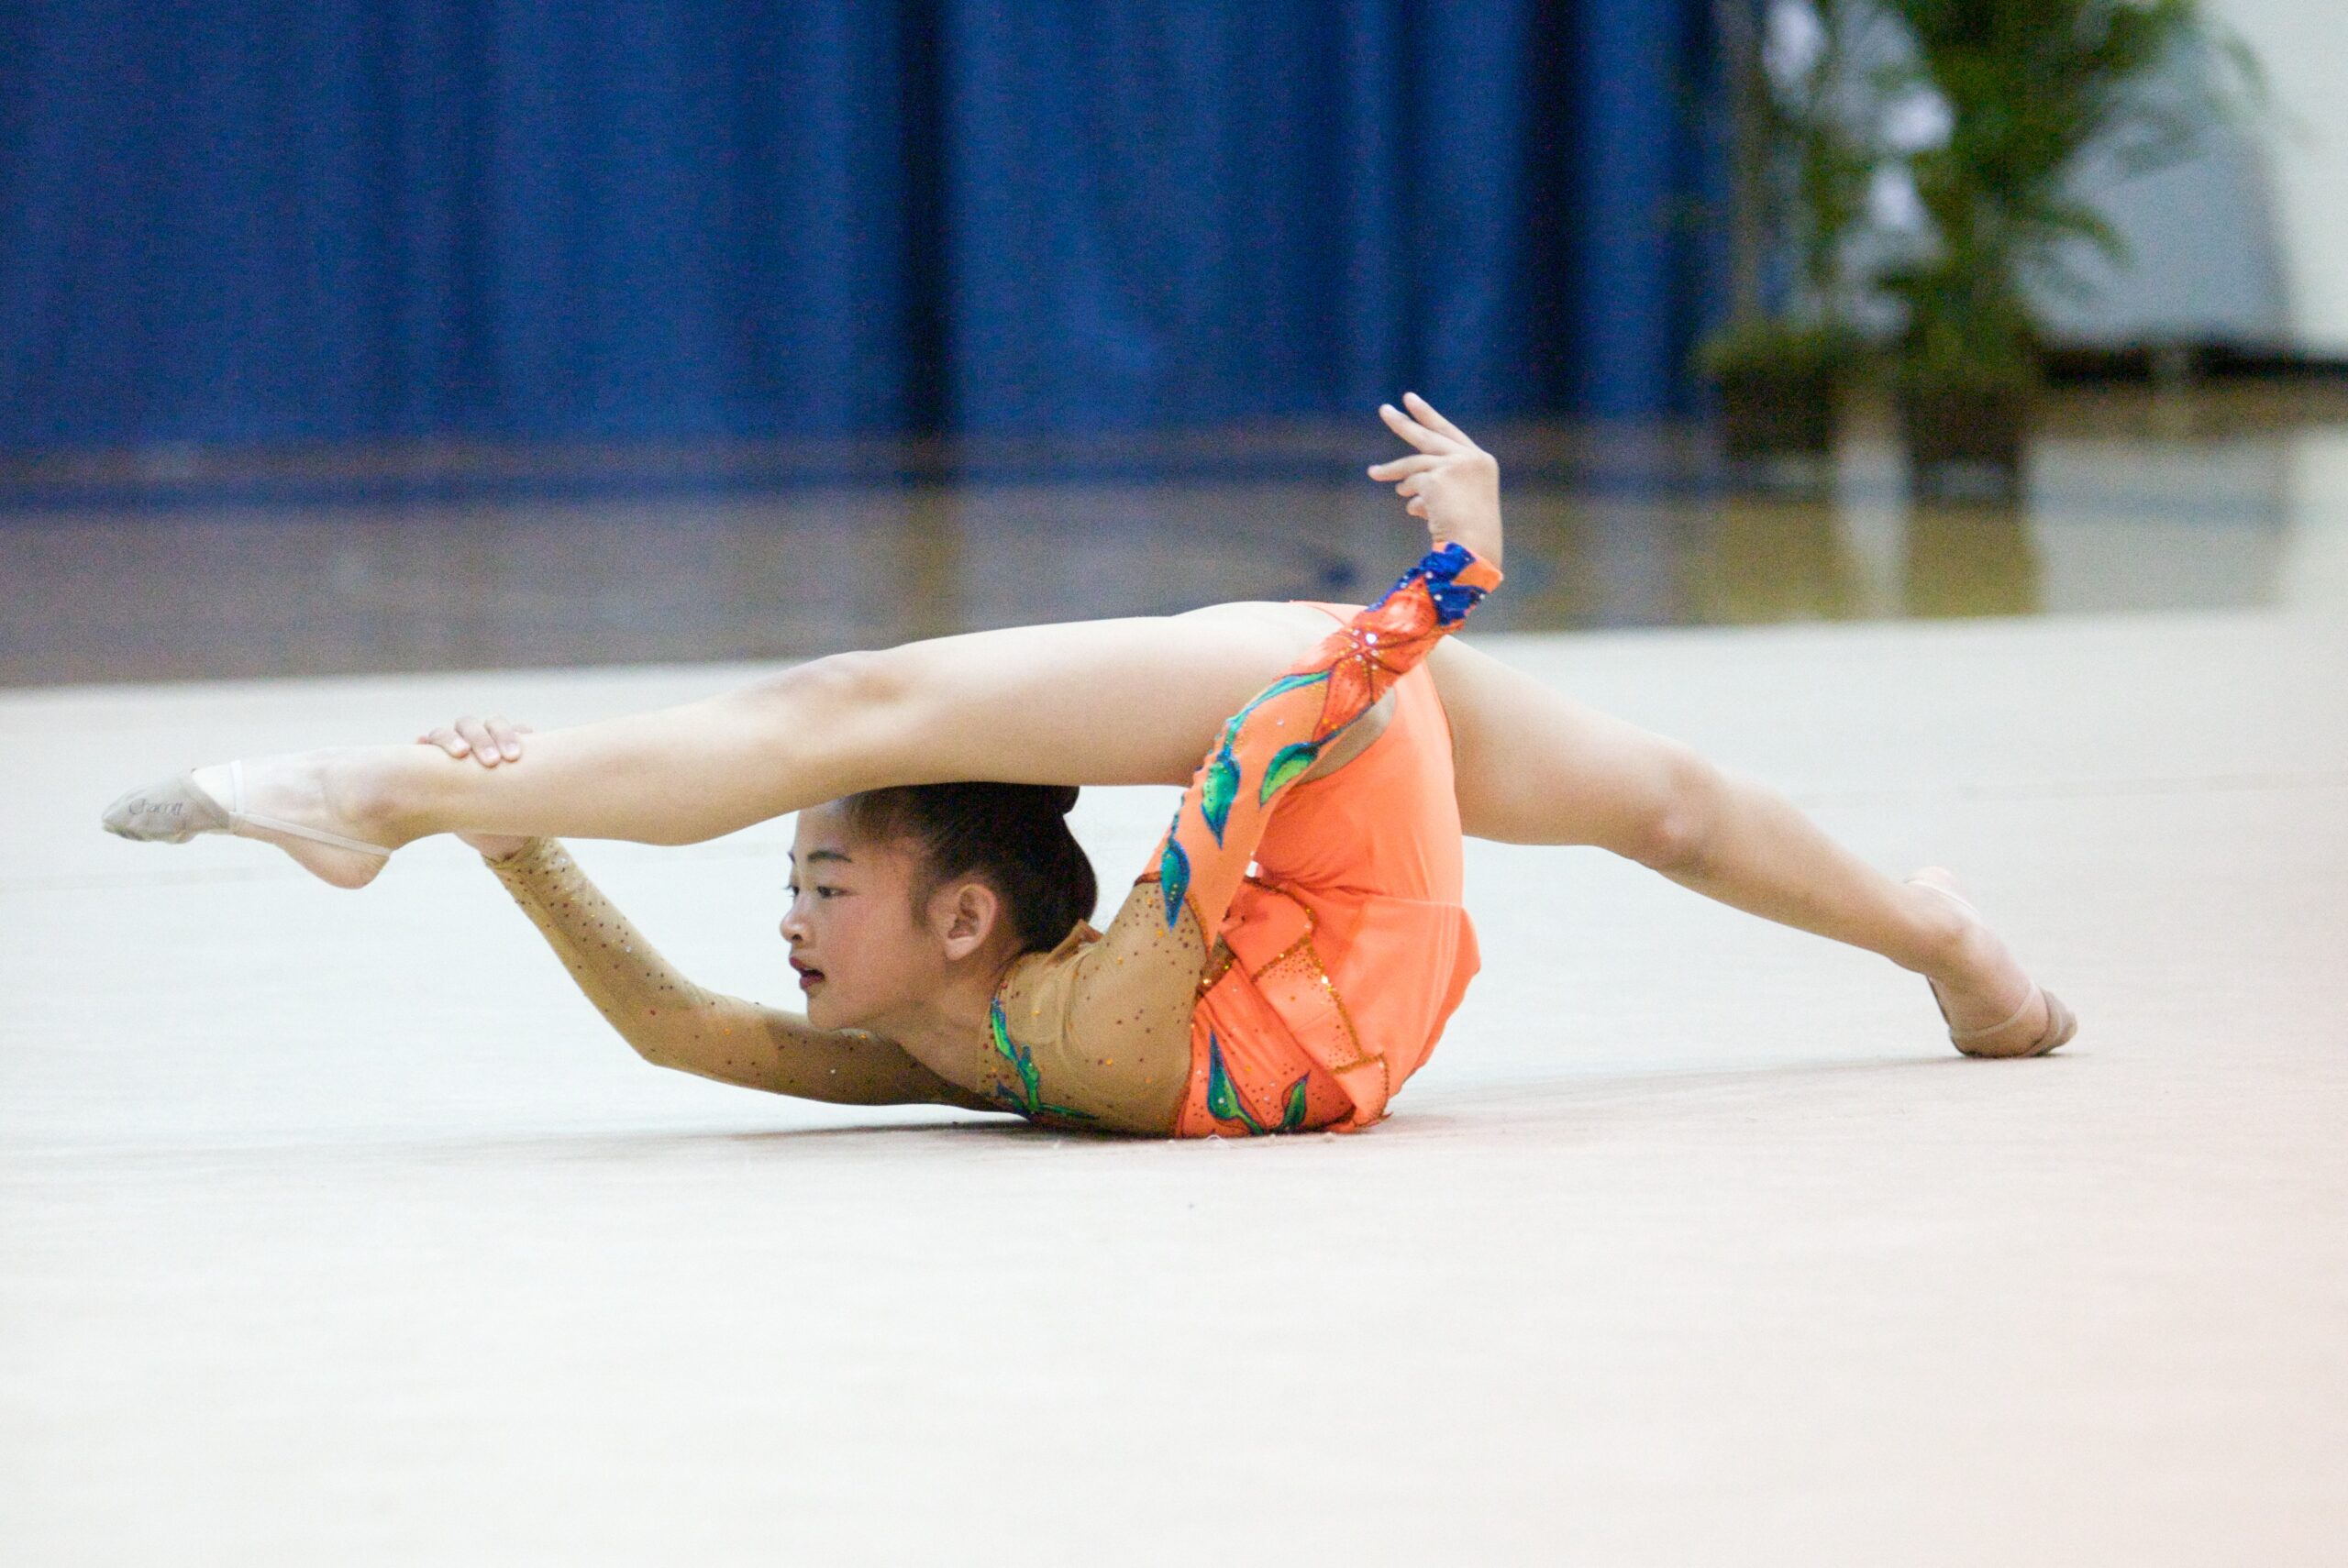 Rhythmic gymnast Andria Gao reflects on the different seasons of her life